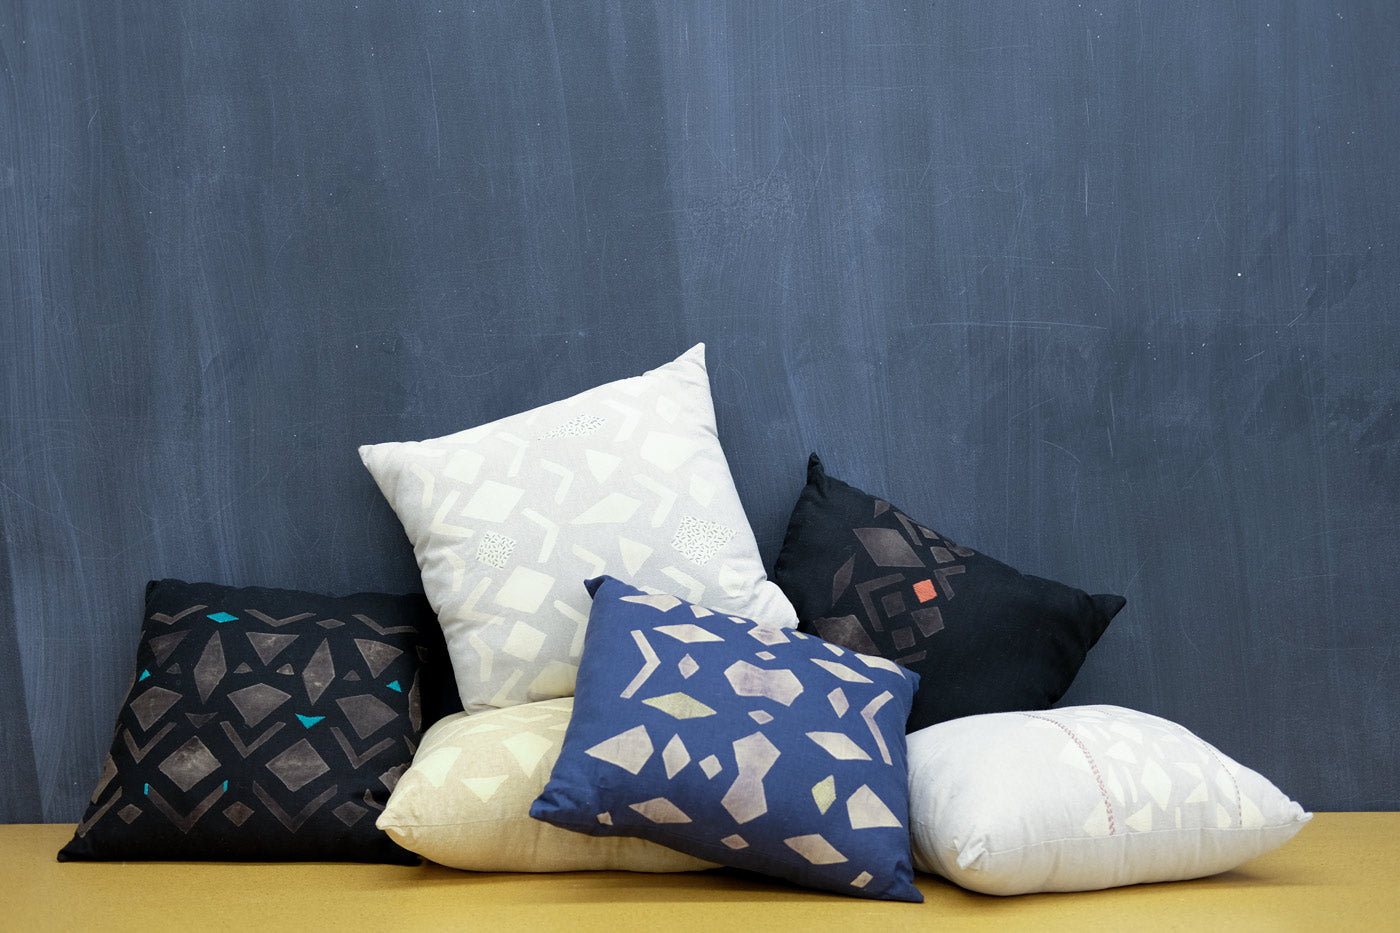 Hand-Printed and Embroidered Pillows